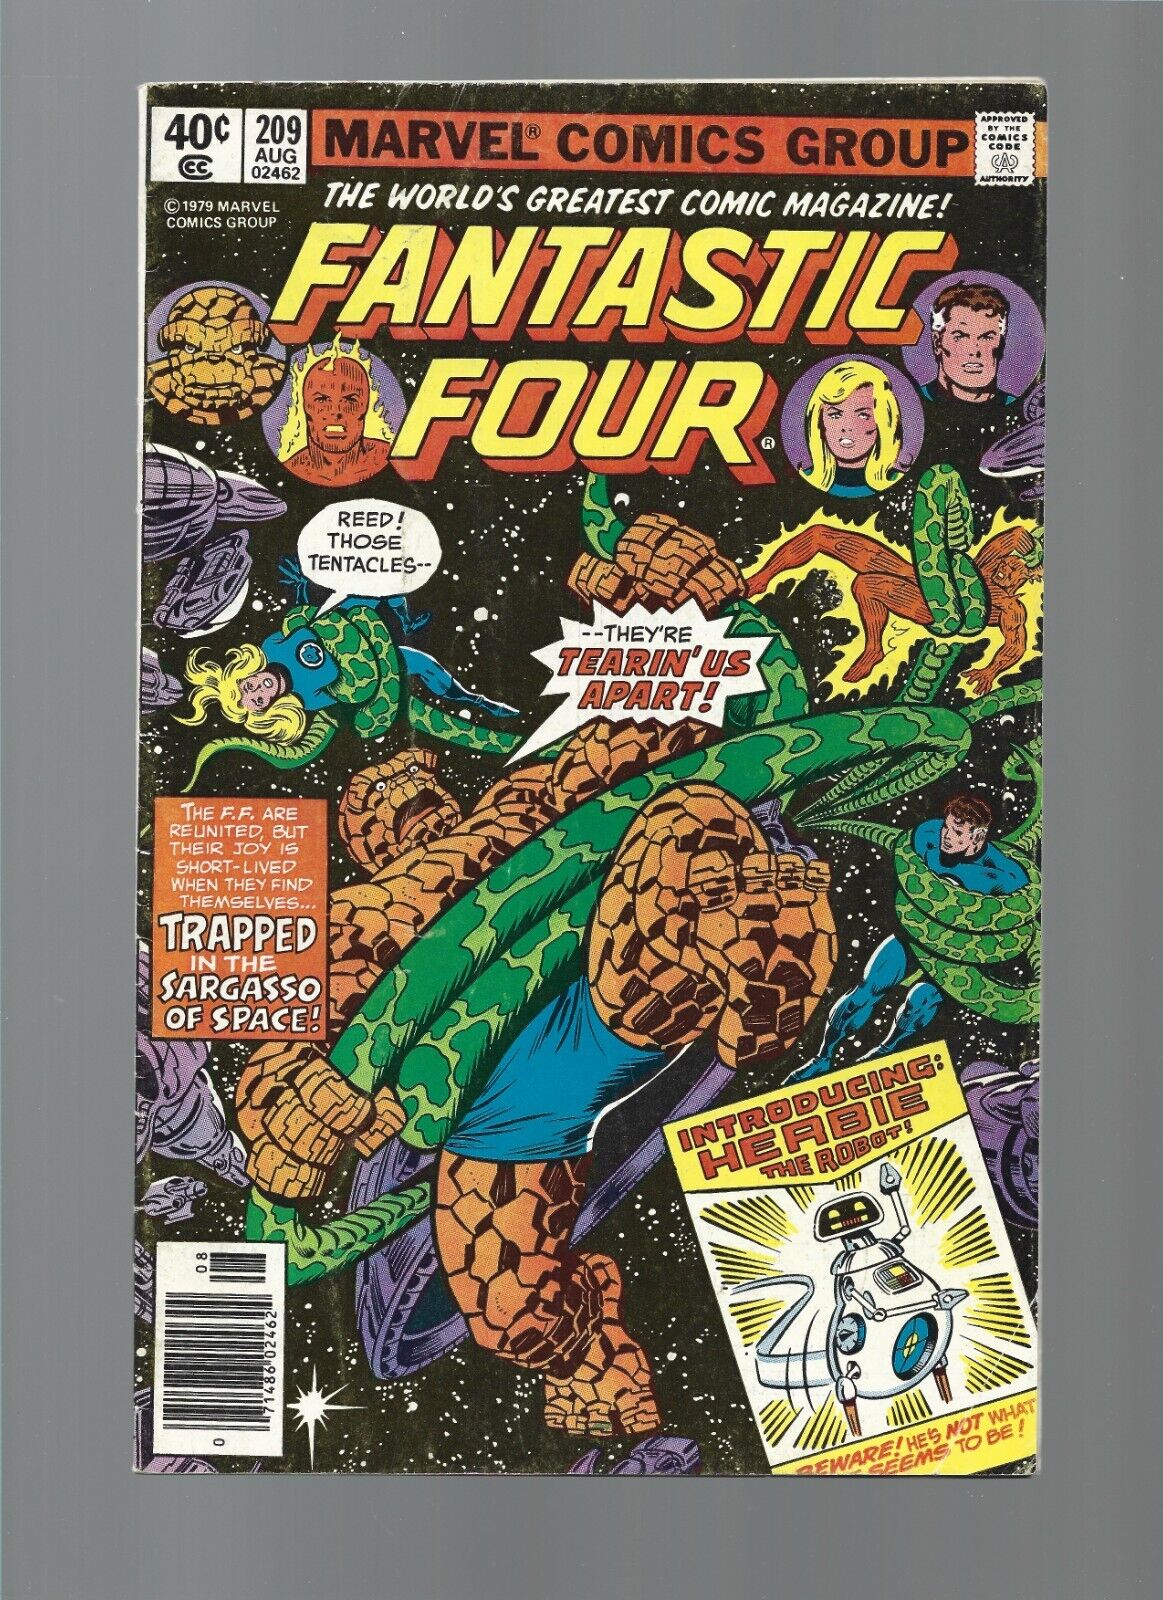 Fantastic Four #209 first appearance HERBIE the Robot